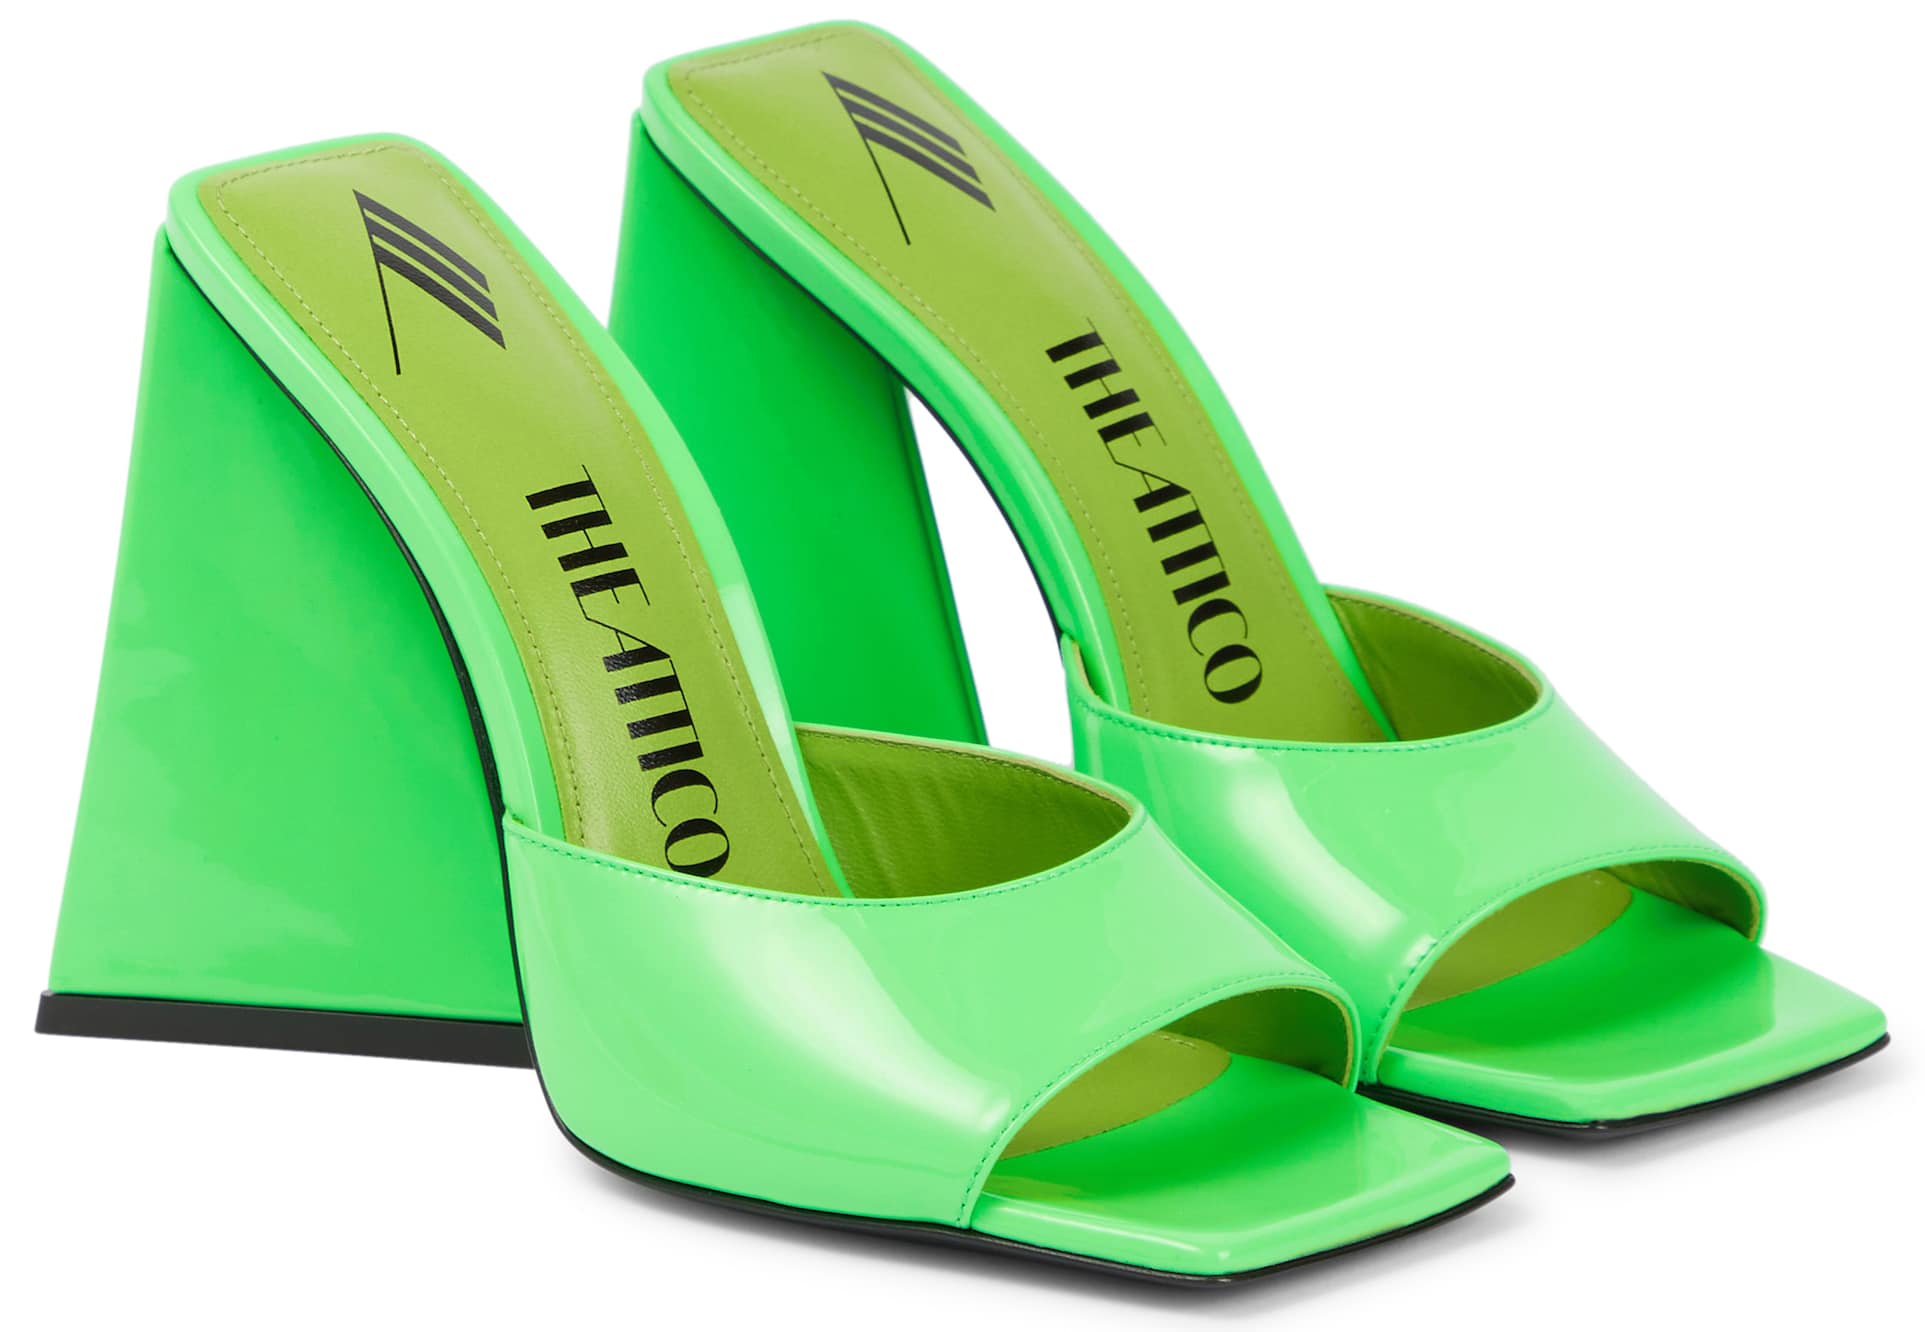 The Devon mules are crafted from neon green patent leather and feature pyramid heels and square open toes